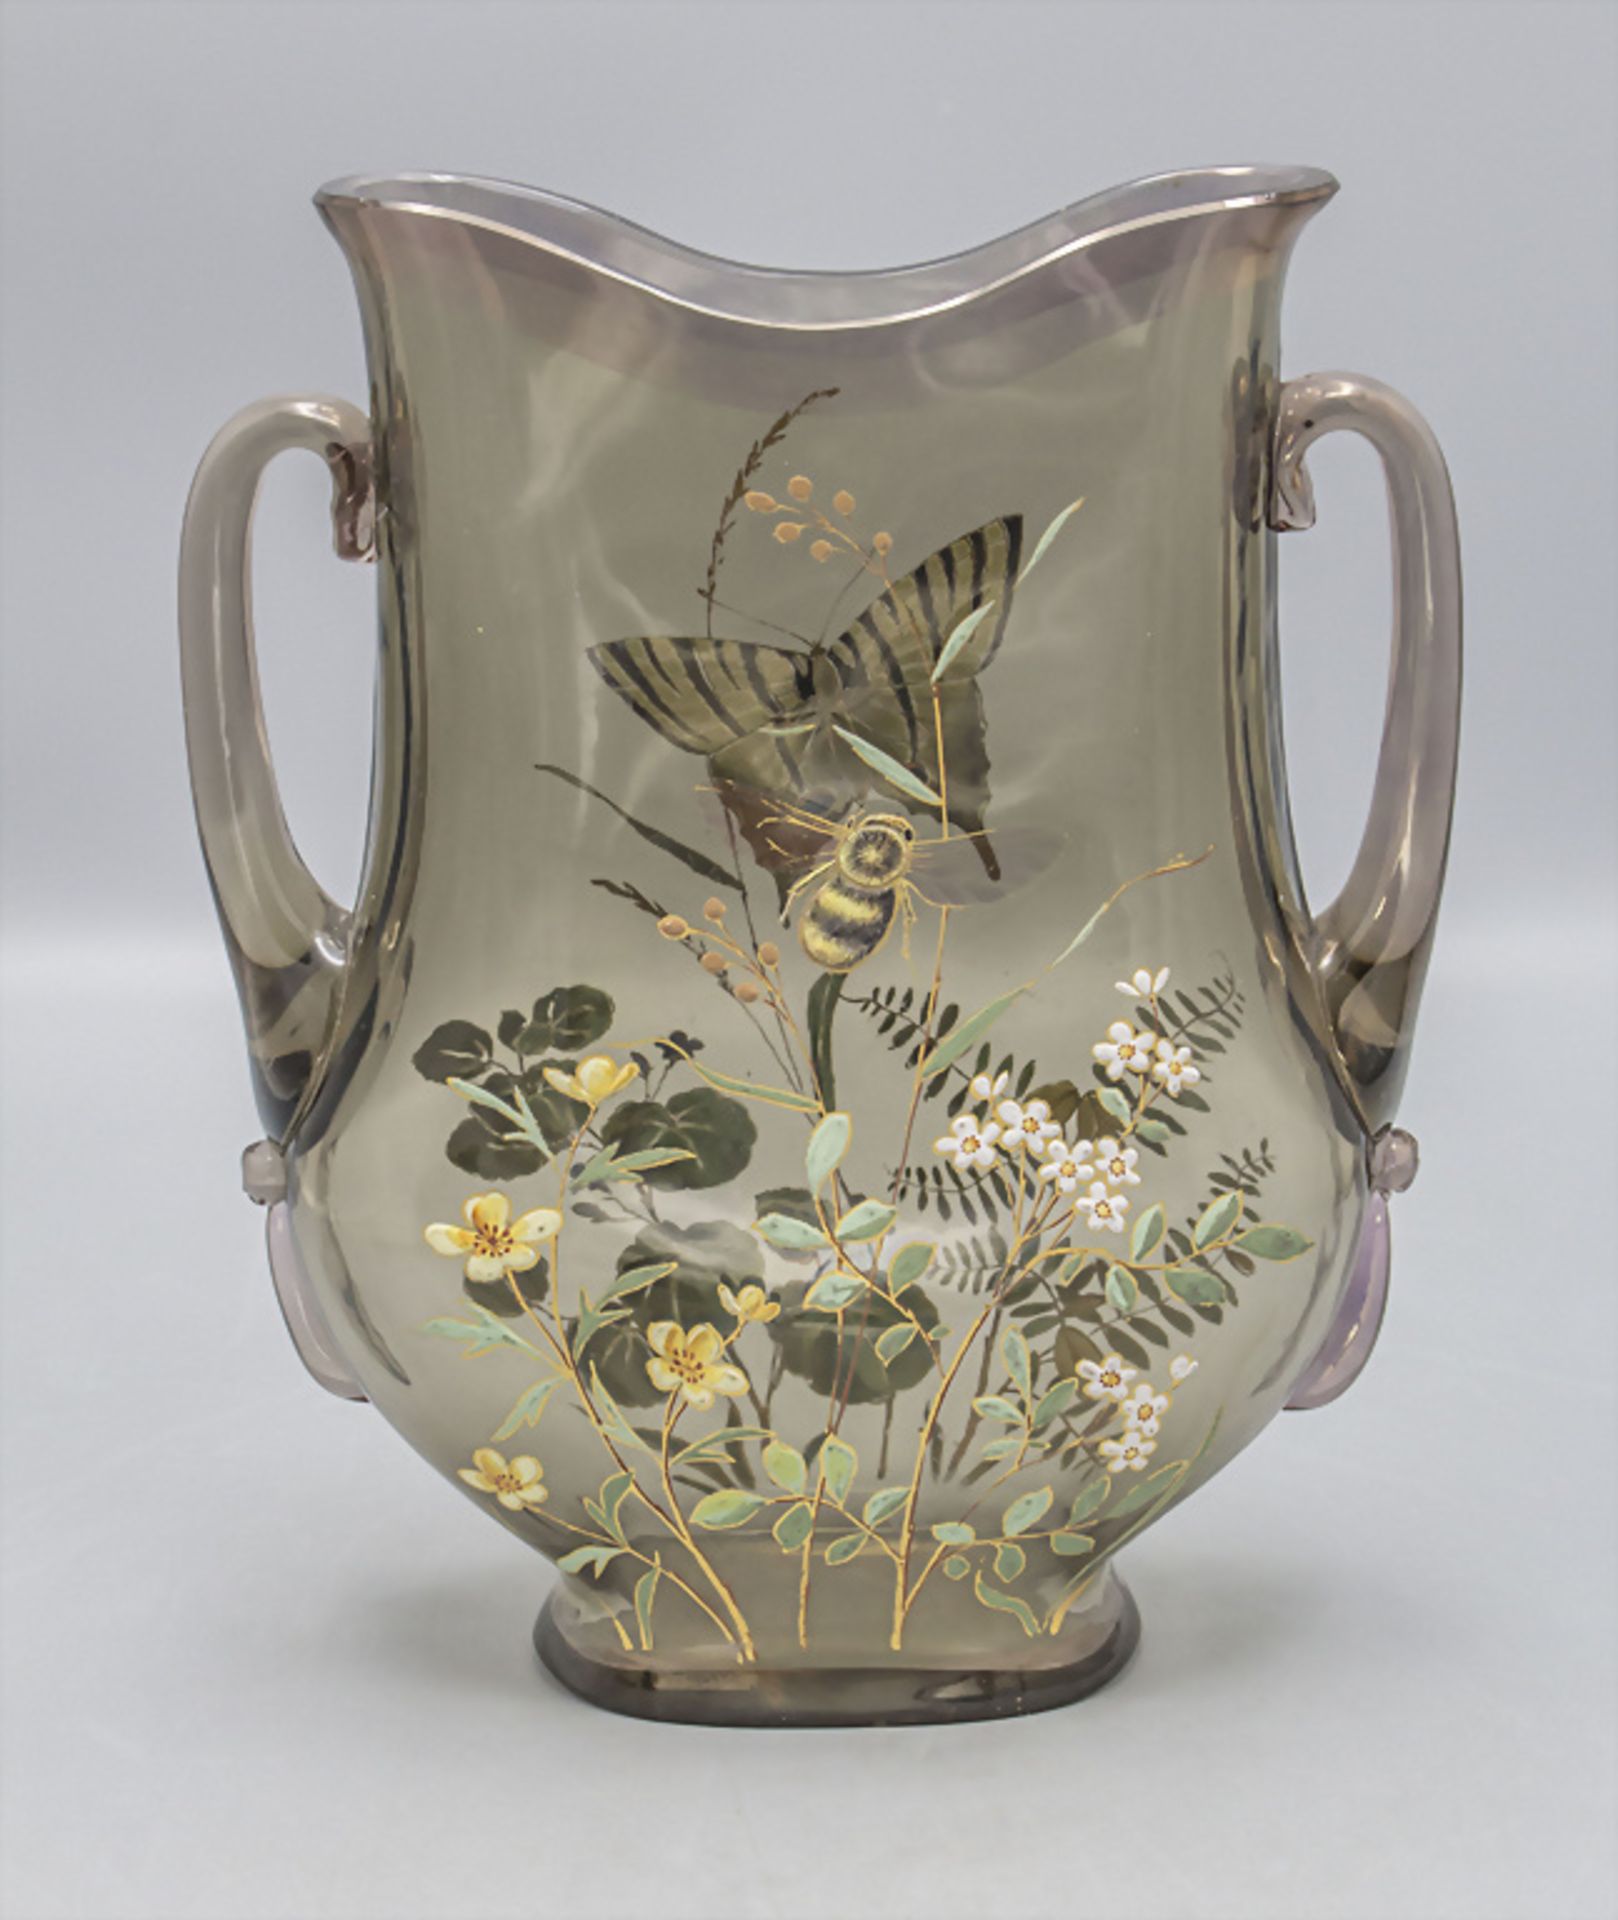 Jugendstil Vase mit Schmetterling / An Art Nouveau glass vase with handles and a swallowtail ... - Image 3 of 4